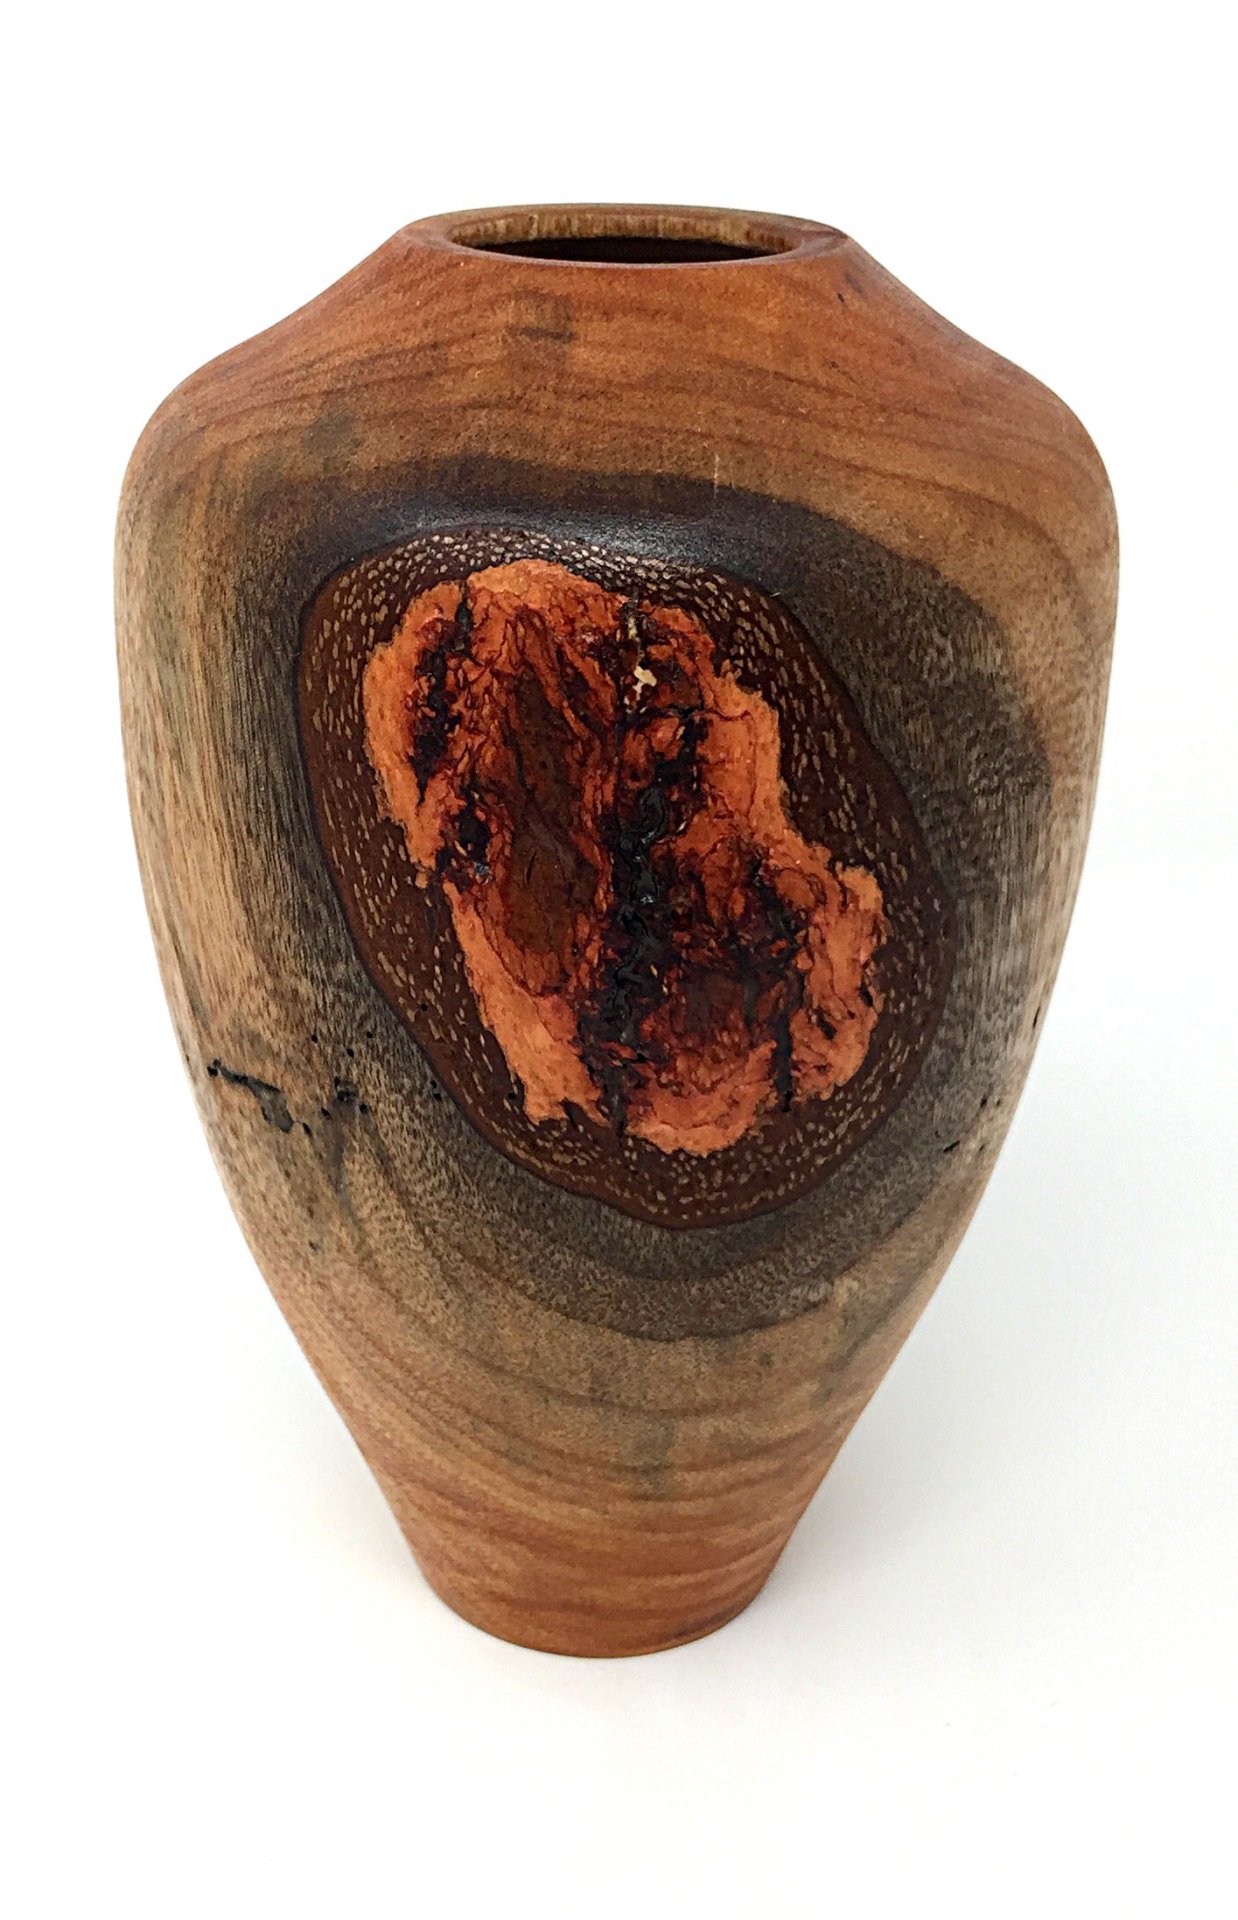 Small Bay Wood Vase-Hollow Form with Bark Inclusion